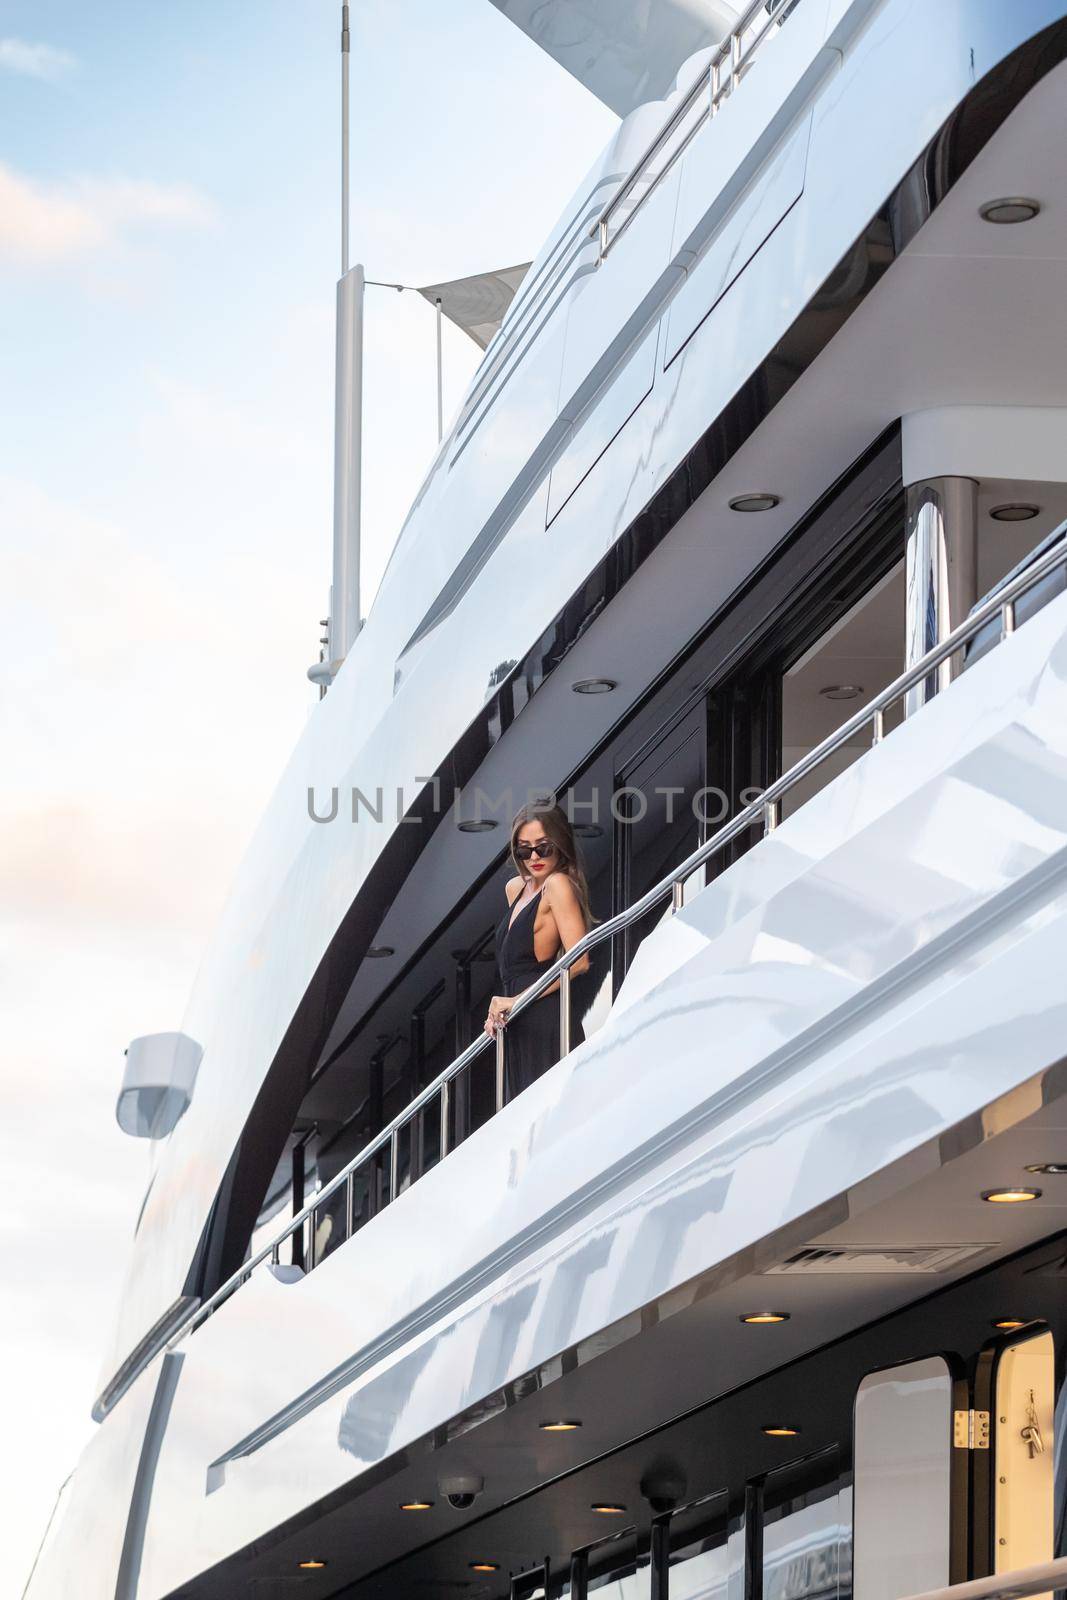 The elegant girl dressed in an evening dress of black color and sunglasses stands on the top deck of a huge yacht in anticipation, red lips, gorgeous lady, she does up hair, Monaco, Monte-Carlo